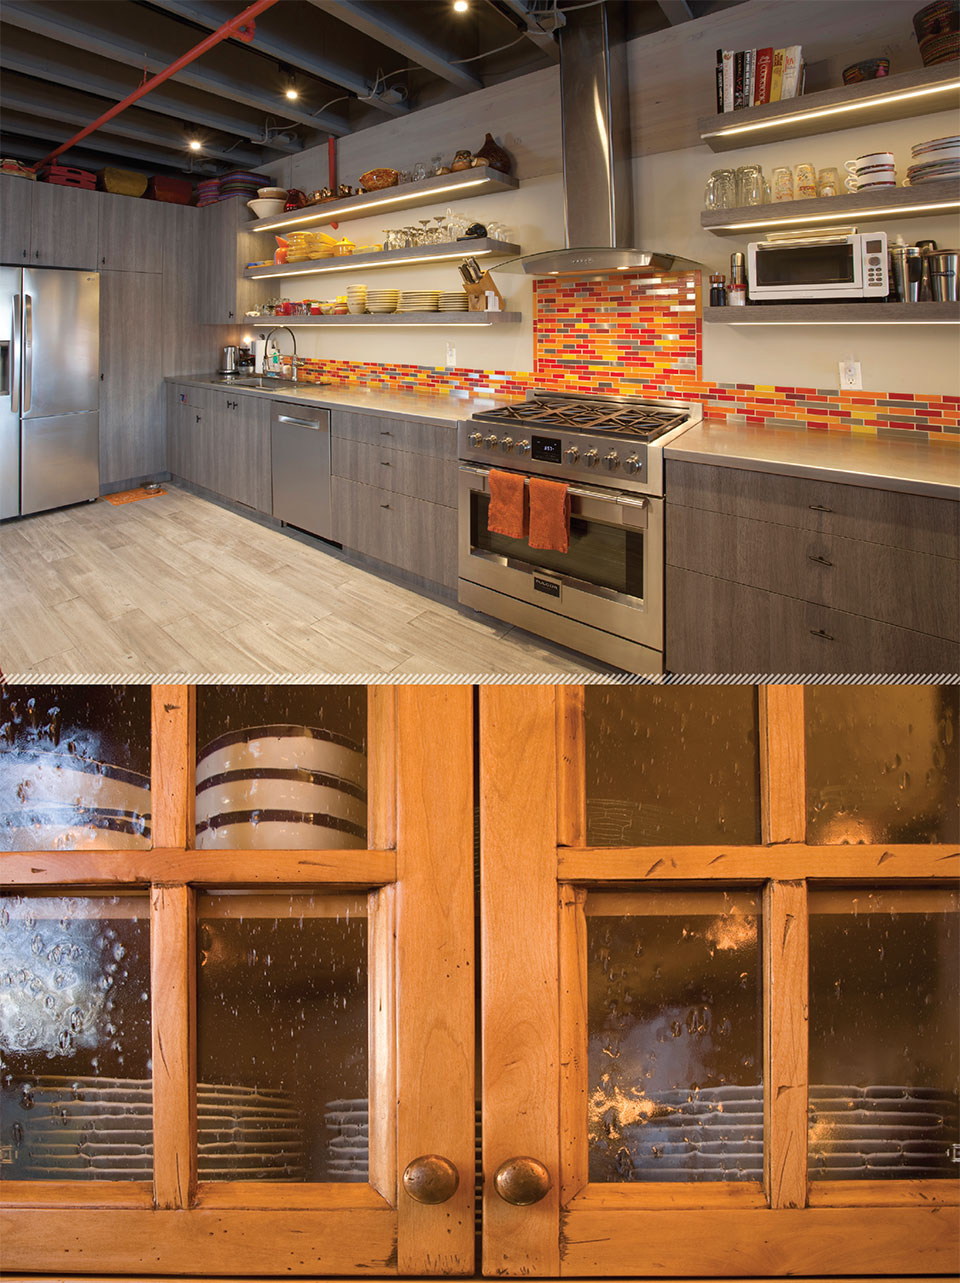 Working with Wood in the Modern West- Sun Valley Kitchen